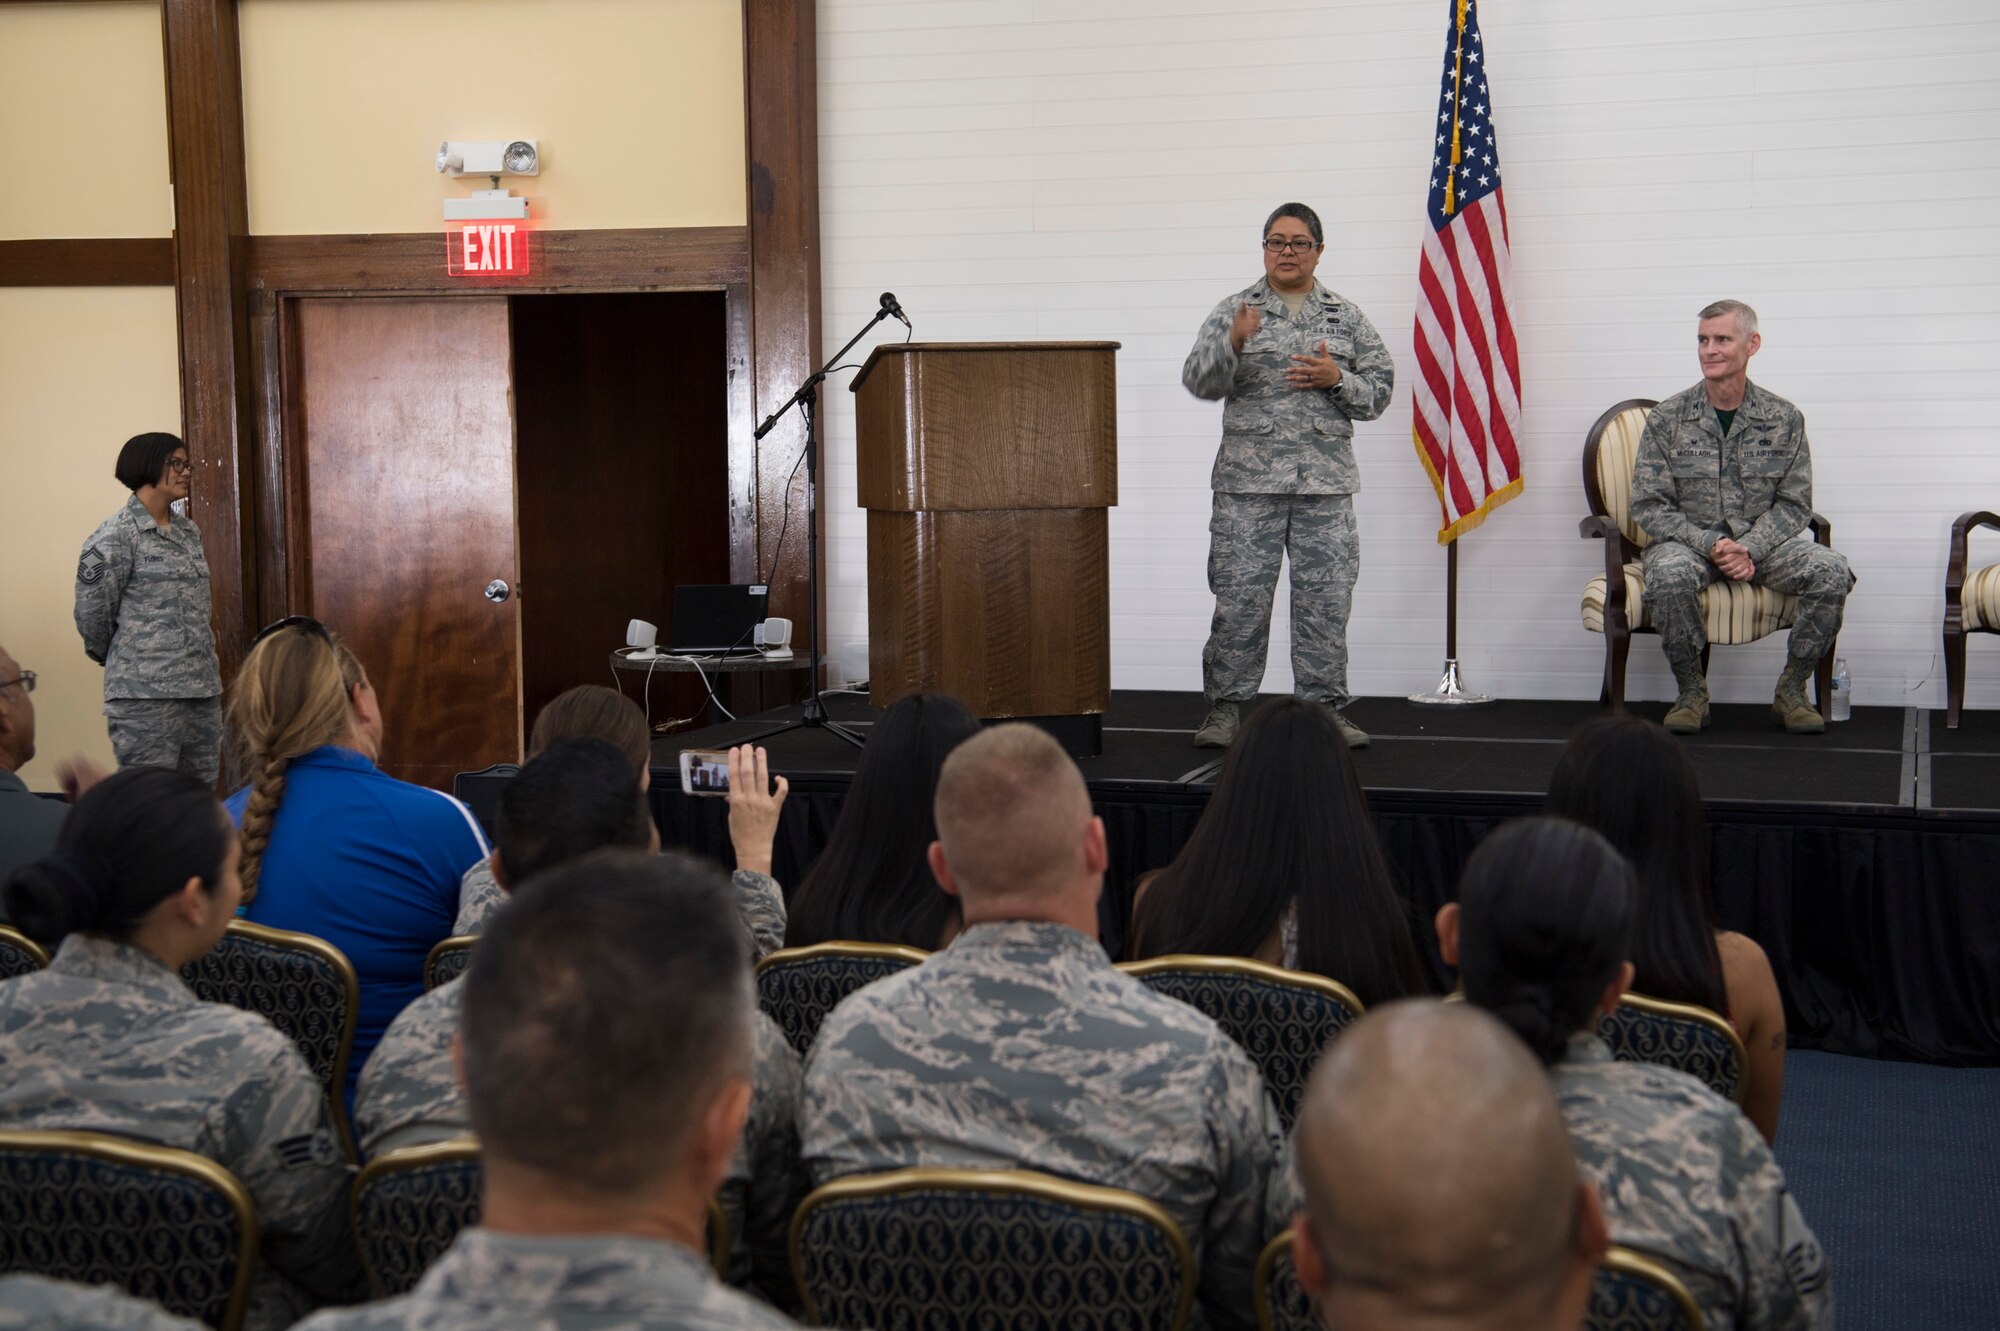 U.S. Air Force Lt. Col. Carla Lugo addresses guest and members of the 44th Aerial Port Squadron after taking command of the squadron during an assumption of command ceremony at Andersen Air Force Base, Guam, June 2, 2018.